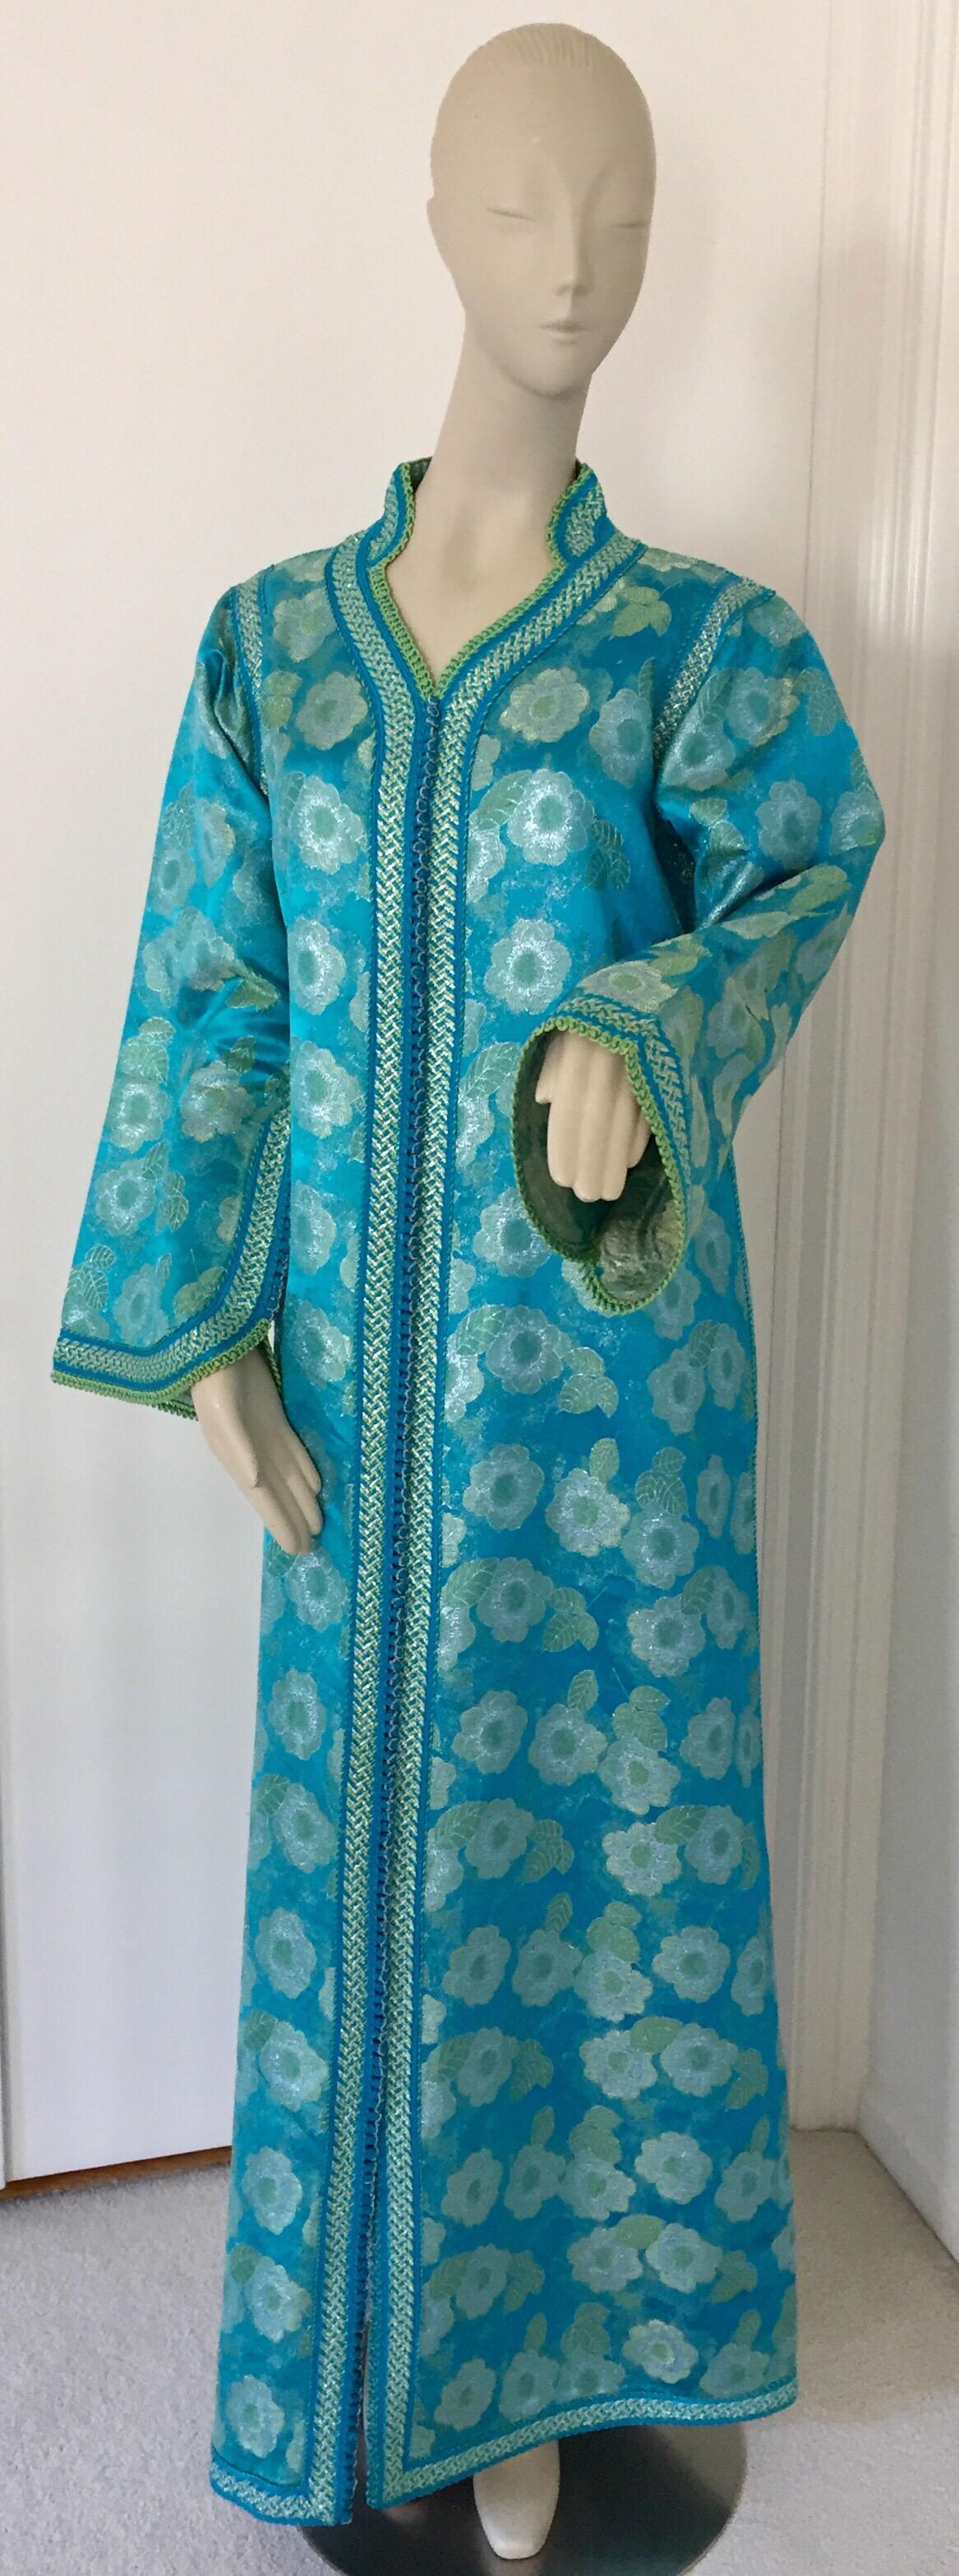 Vintage Moroccan Kaftan in Turquoise and Gold Floral Brocade In Good Condition For Sale In North Hollywood, CA